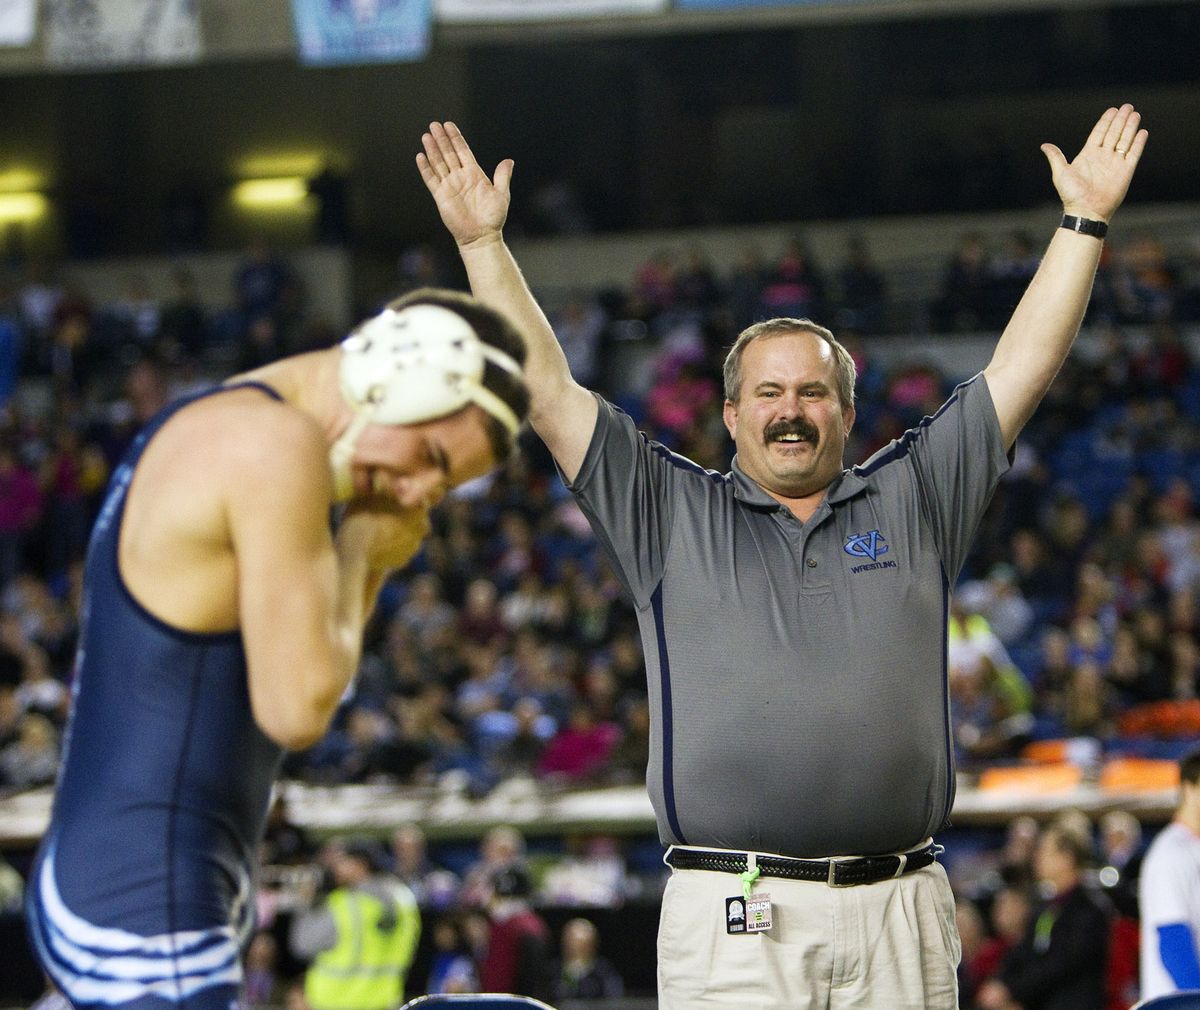 Ron Beard signals victory after his son, CV’s Blake Beard, left, won the 126-pound championship. (Patrick Hagerty)